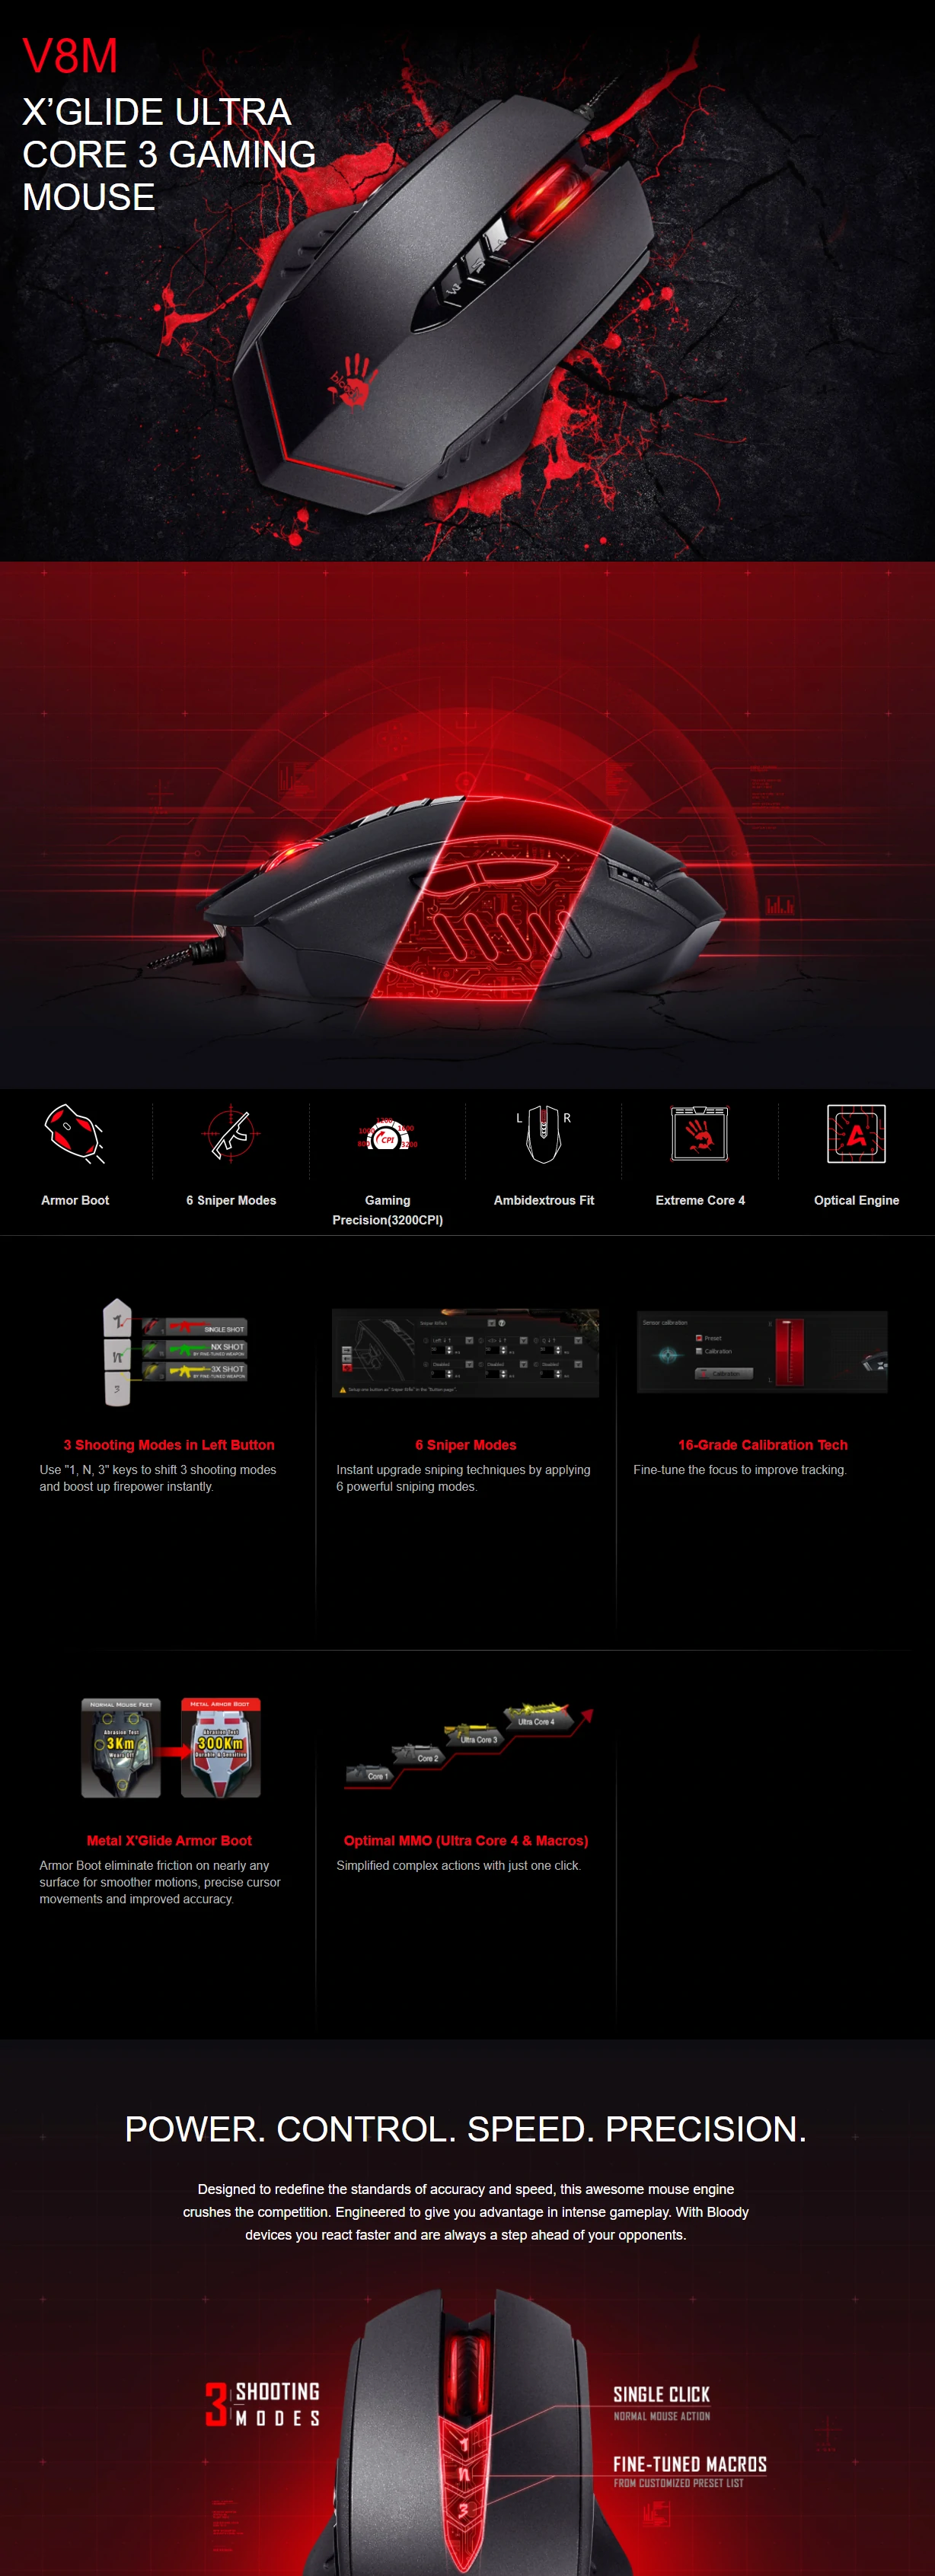 Overview - Bloody - V8M X'Glide Ultra Core 3 Gaming Mouse